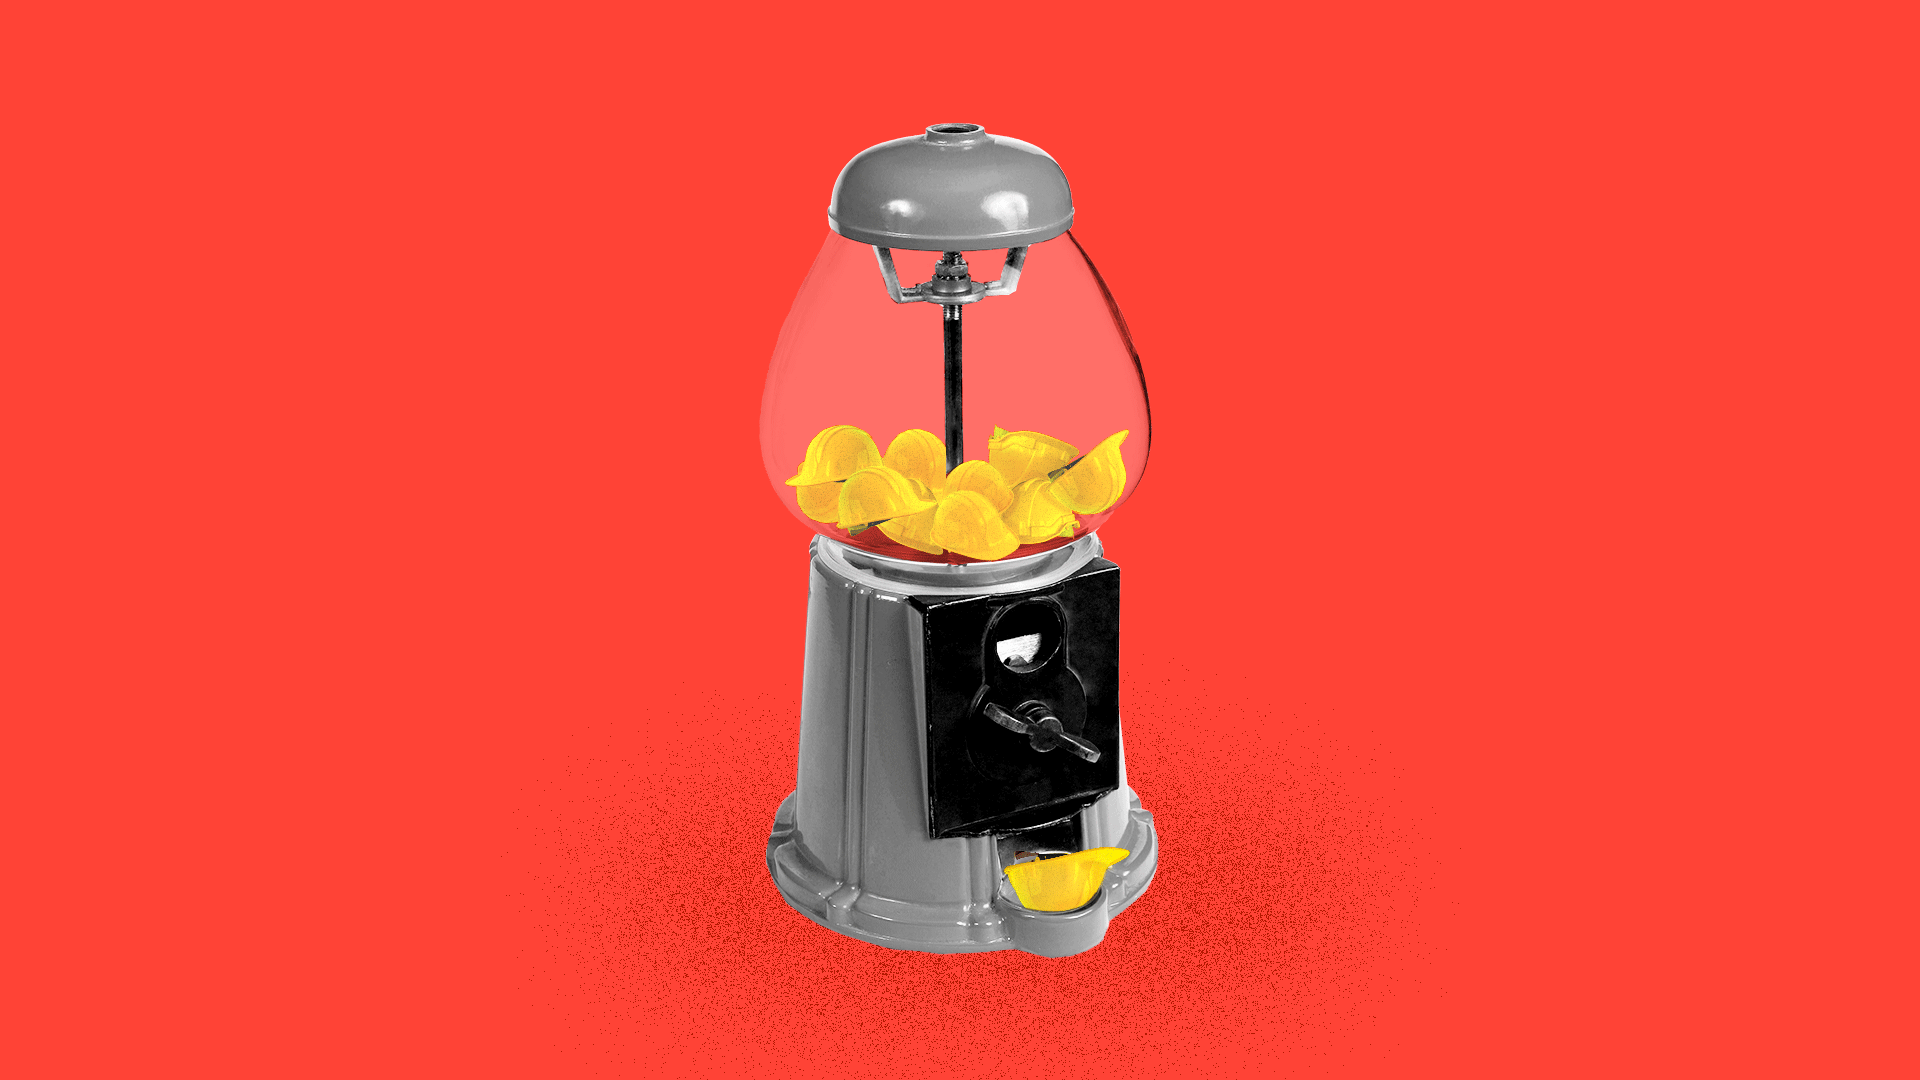 Illustration of yellow hard hats being dispensed from a near-empty candy machine.